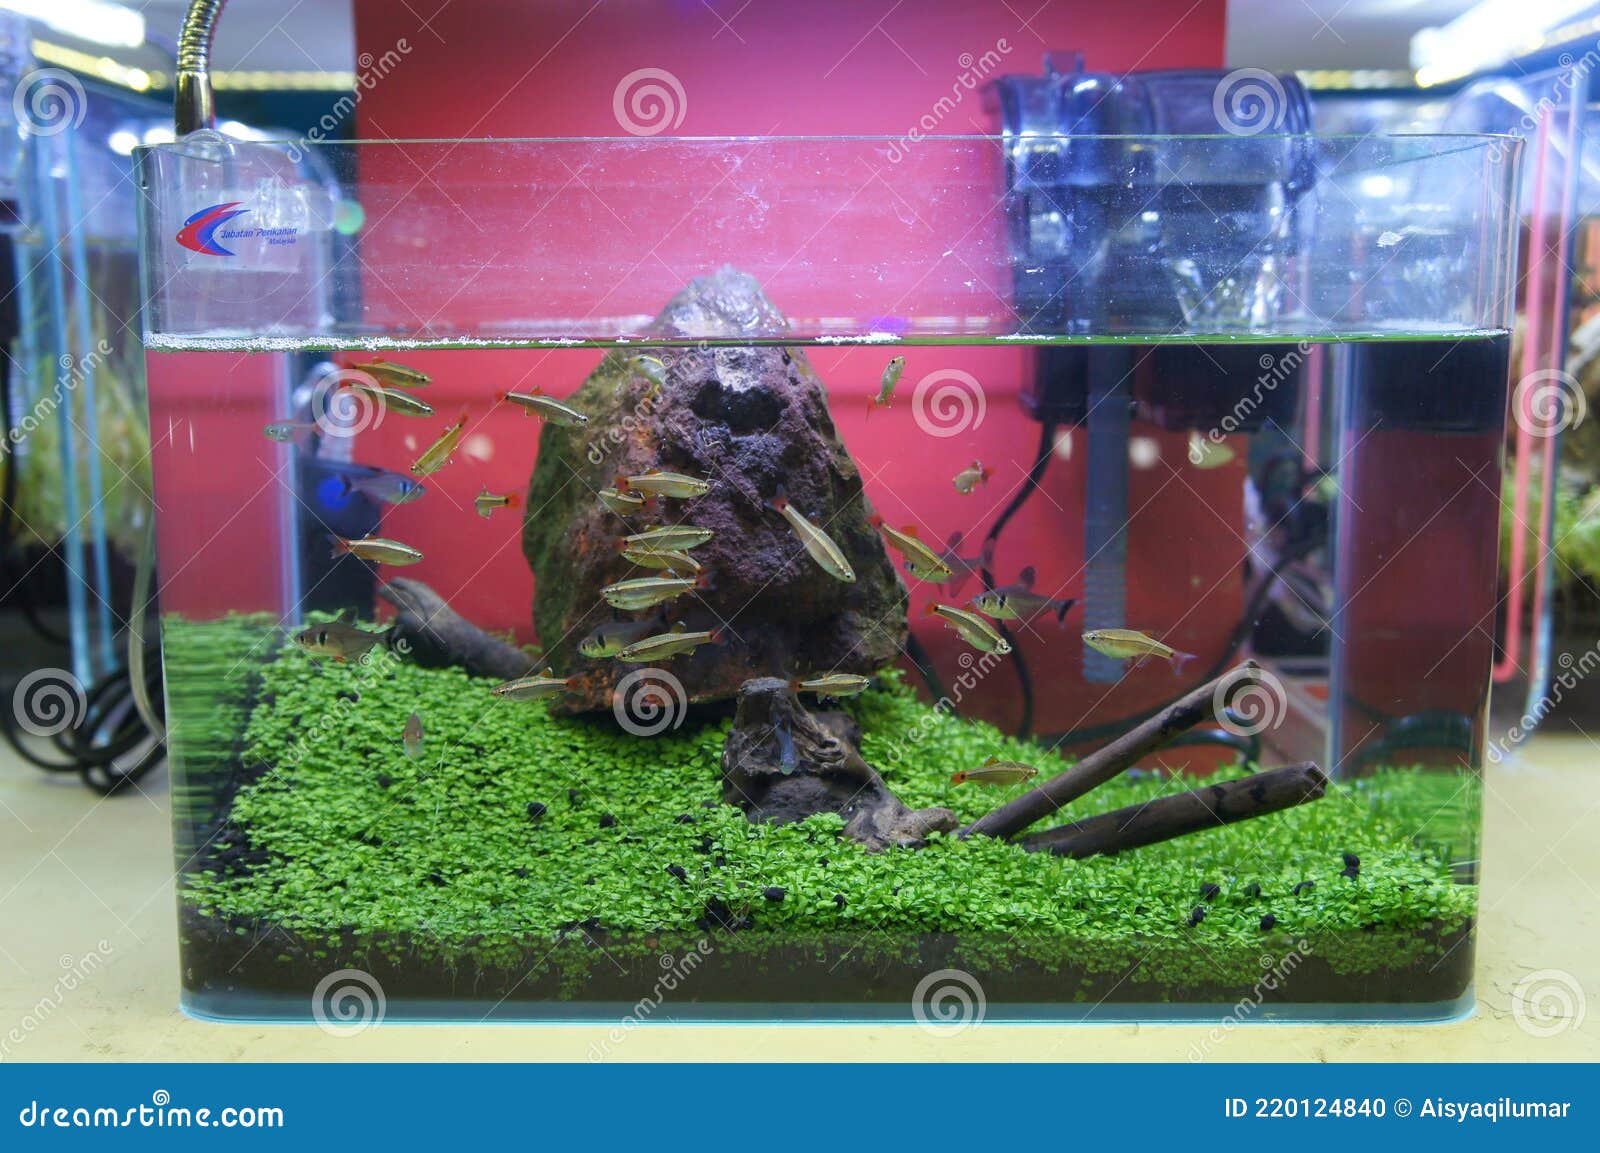 Aquascape and Terrarium Design with Group of Small Fish in a Small